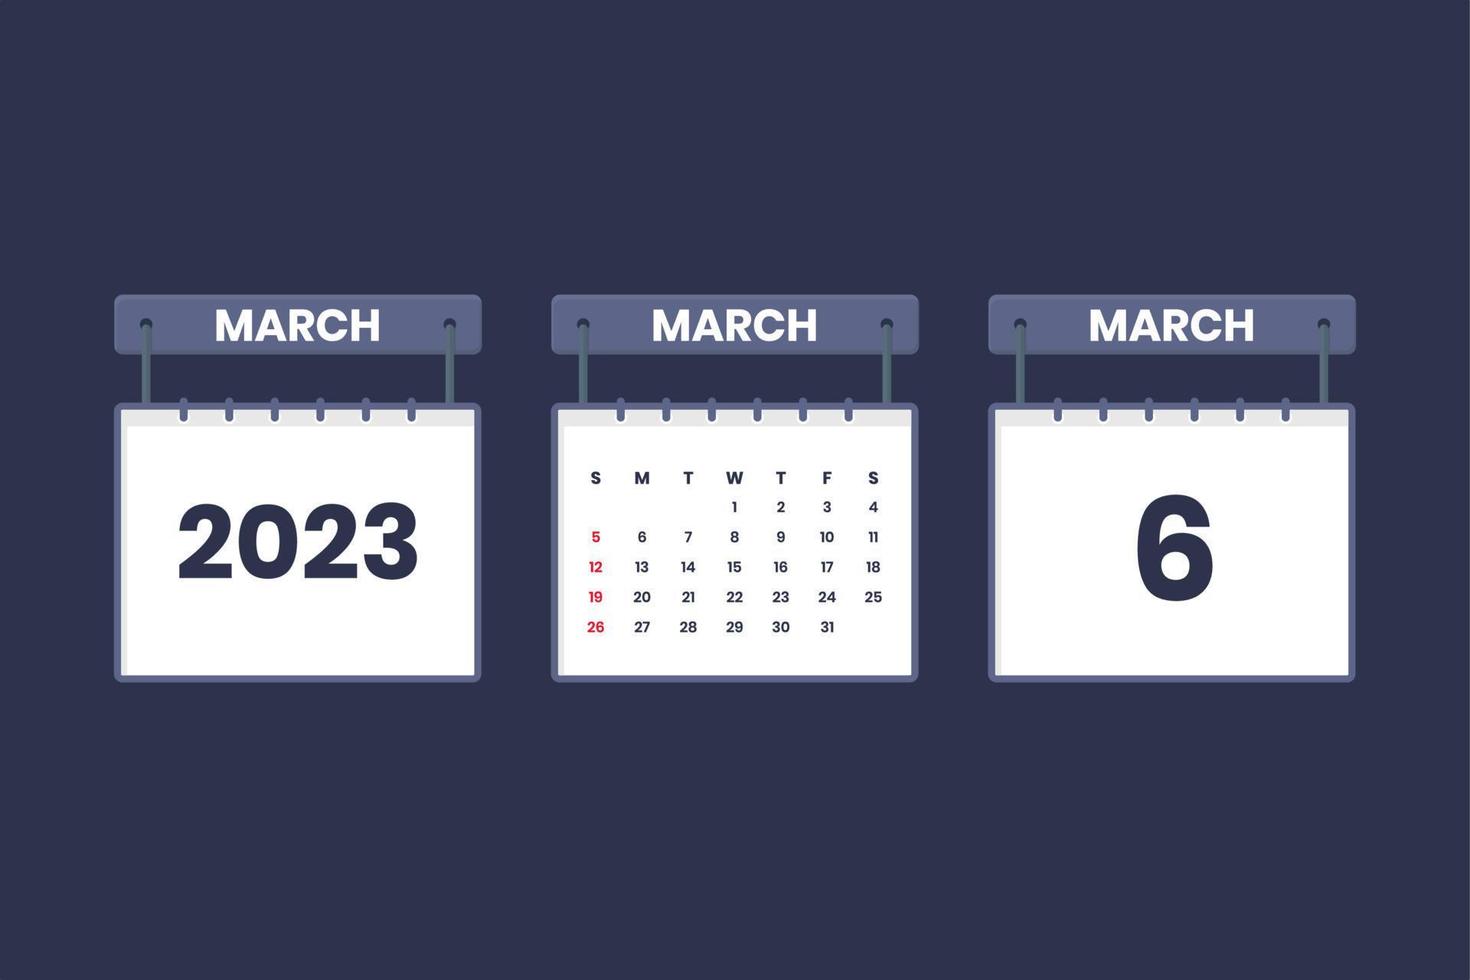 6 March 2023 calendar icon for schedule, appointment, important date concept vector